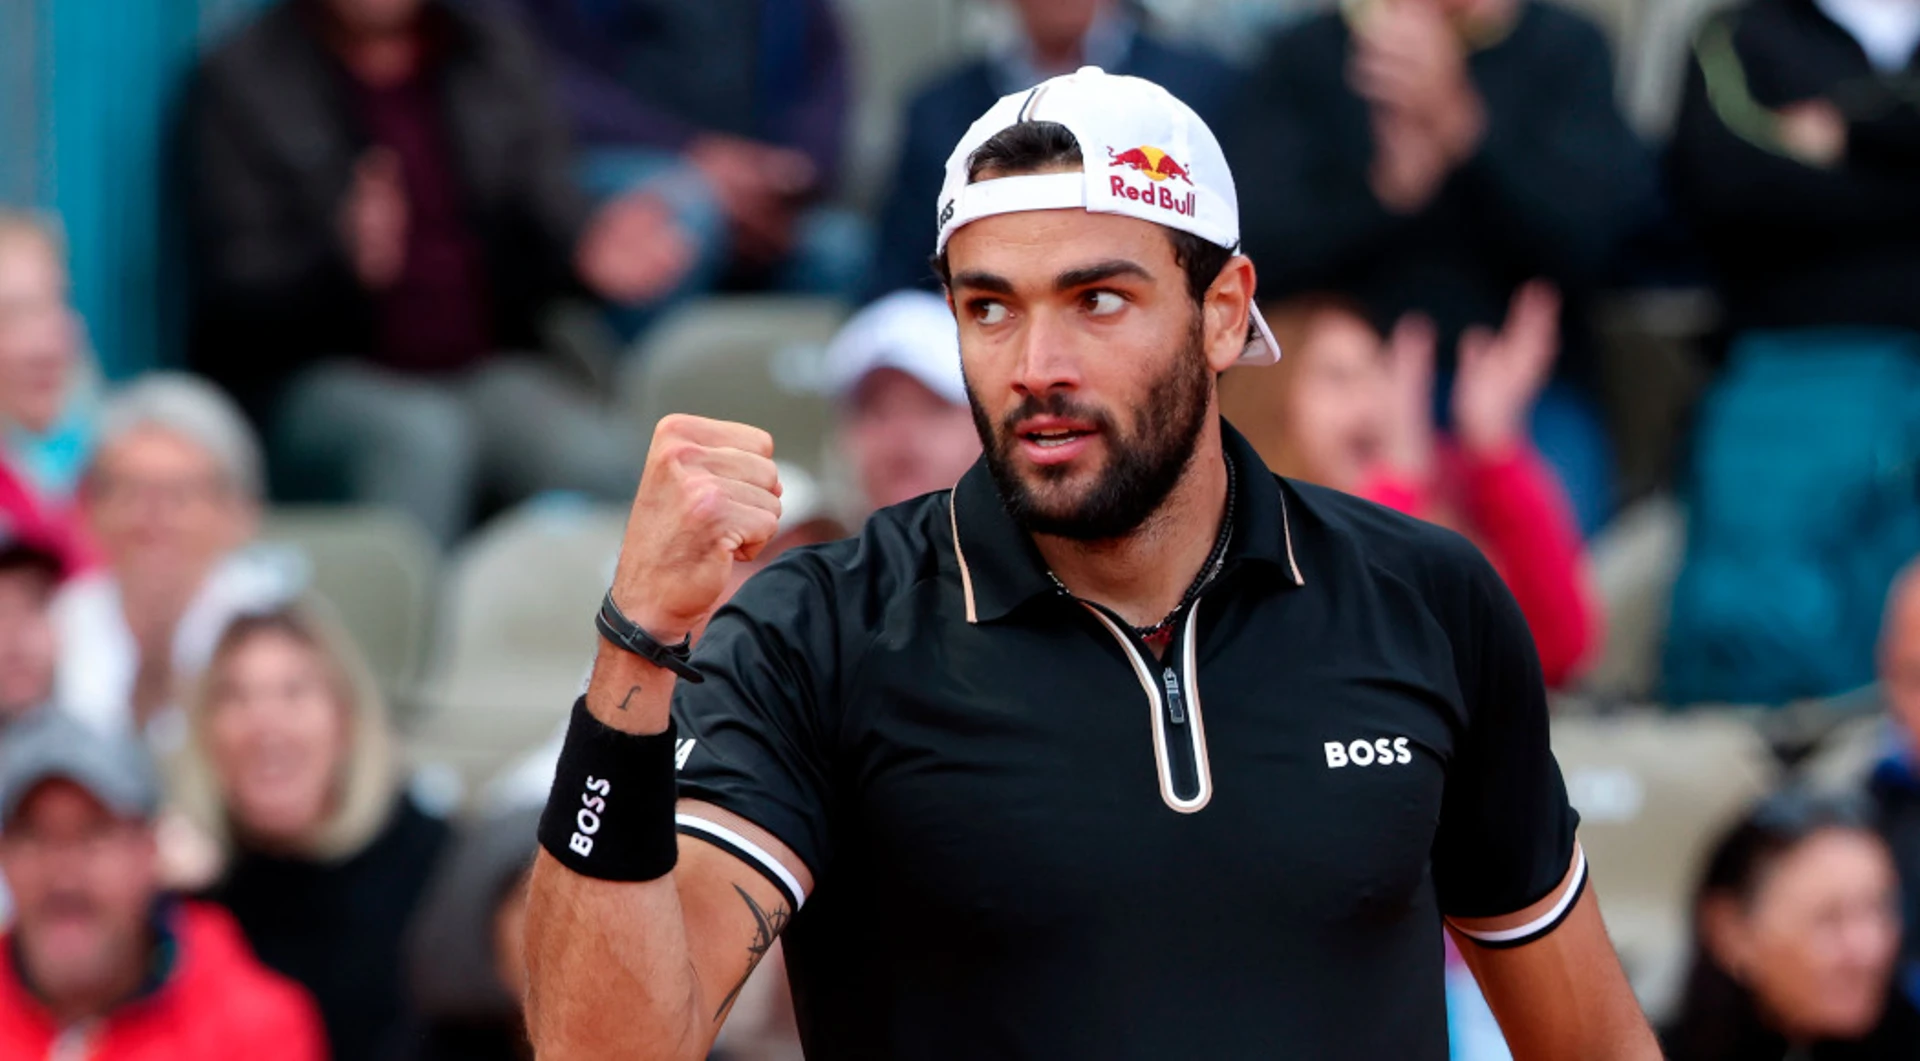 Berrettini brushes Halys aside to win Gstaad title